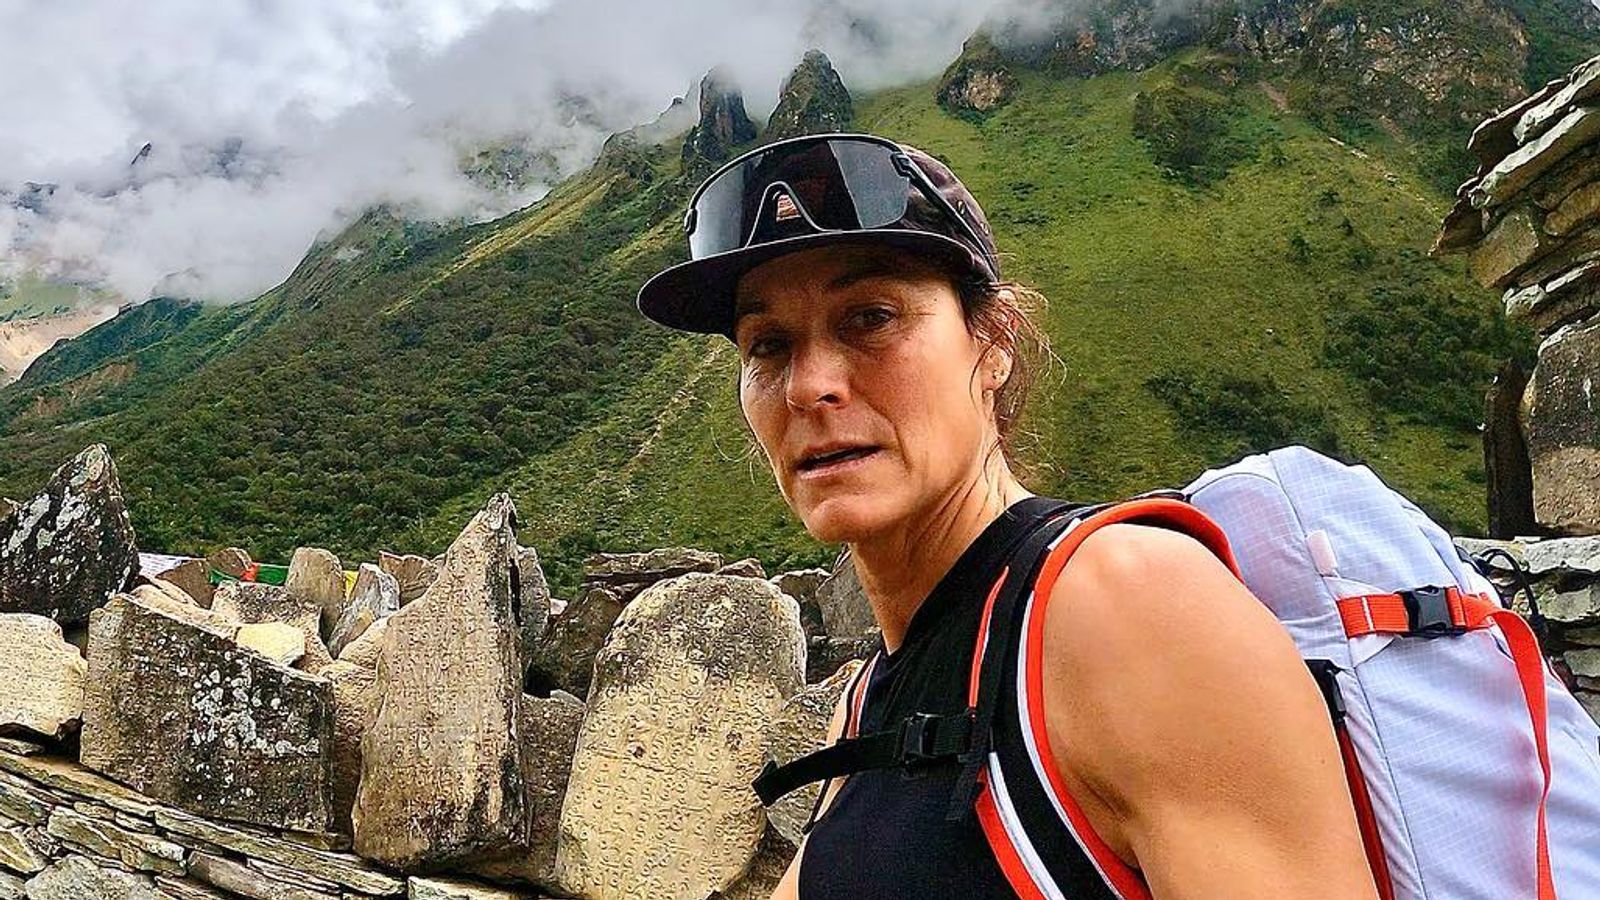 US climber Hilaree Nelson found dead after fall from Mount Manaslu in Nepal